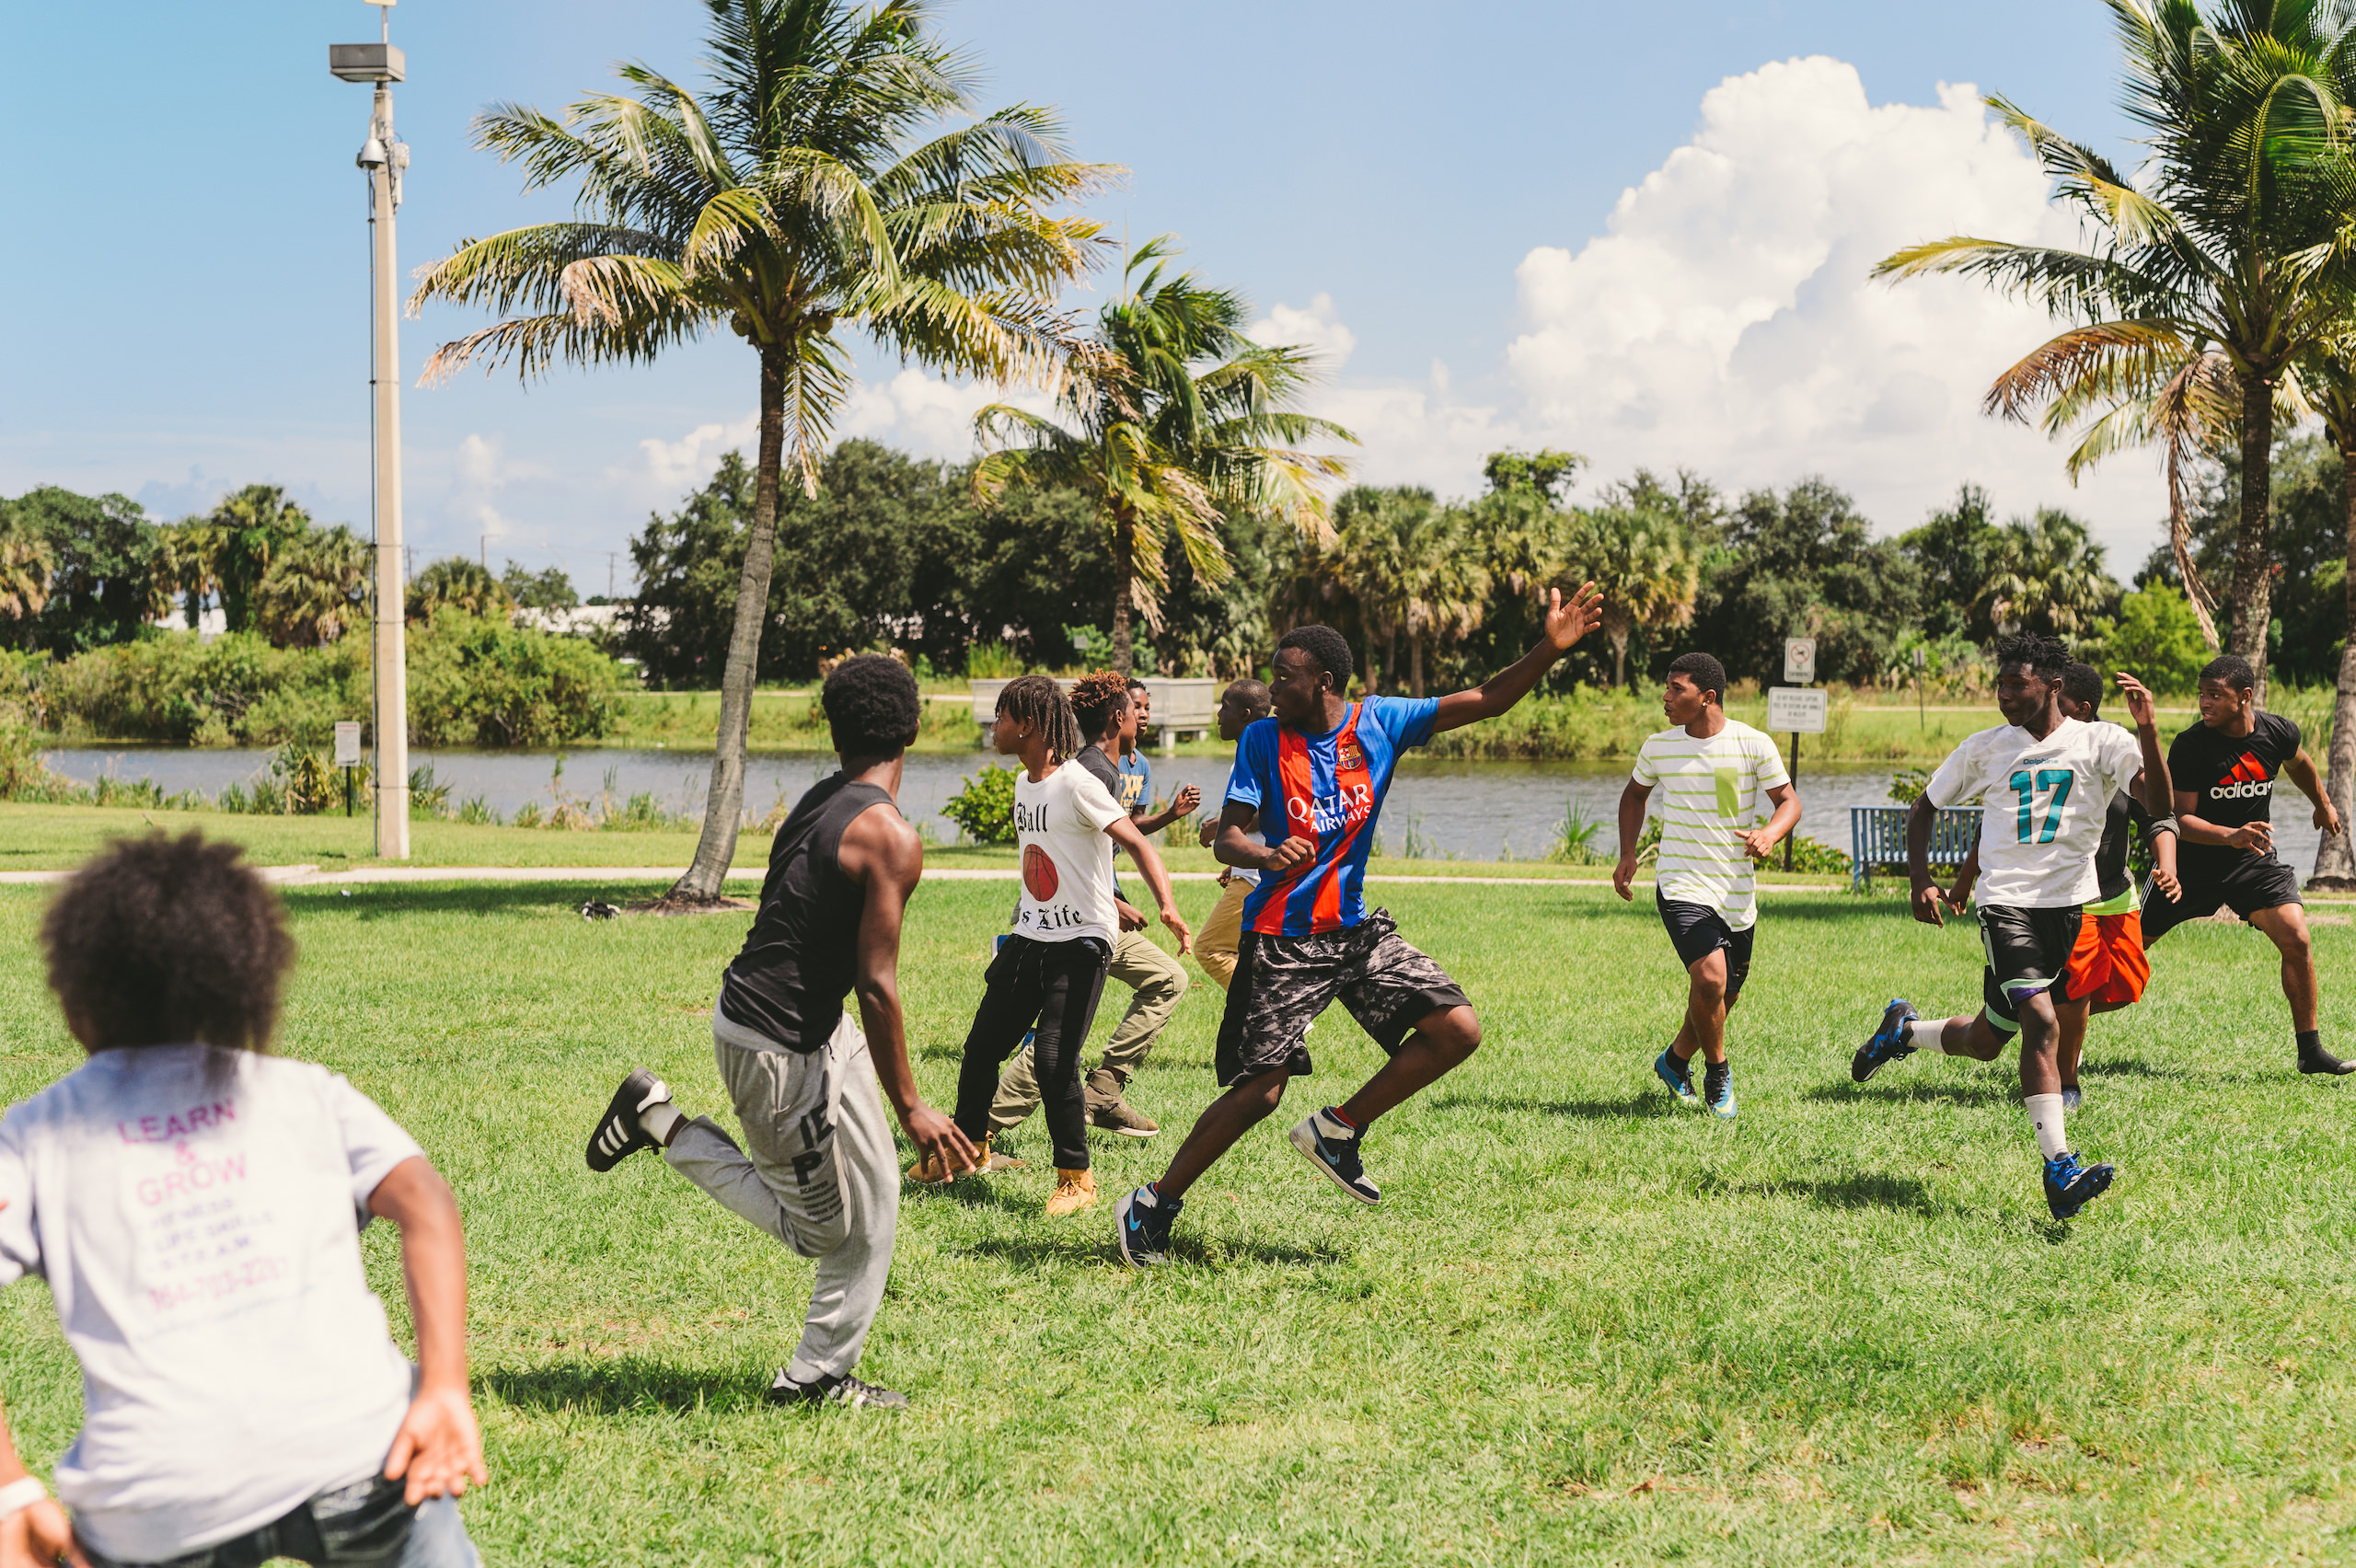 KES Group of young adults playing a sport in a field